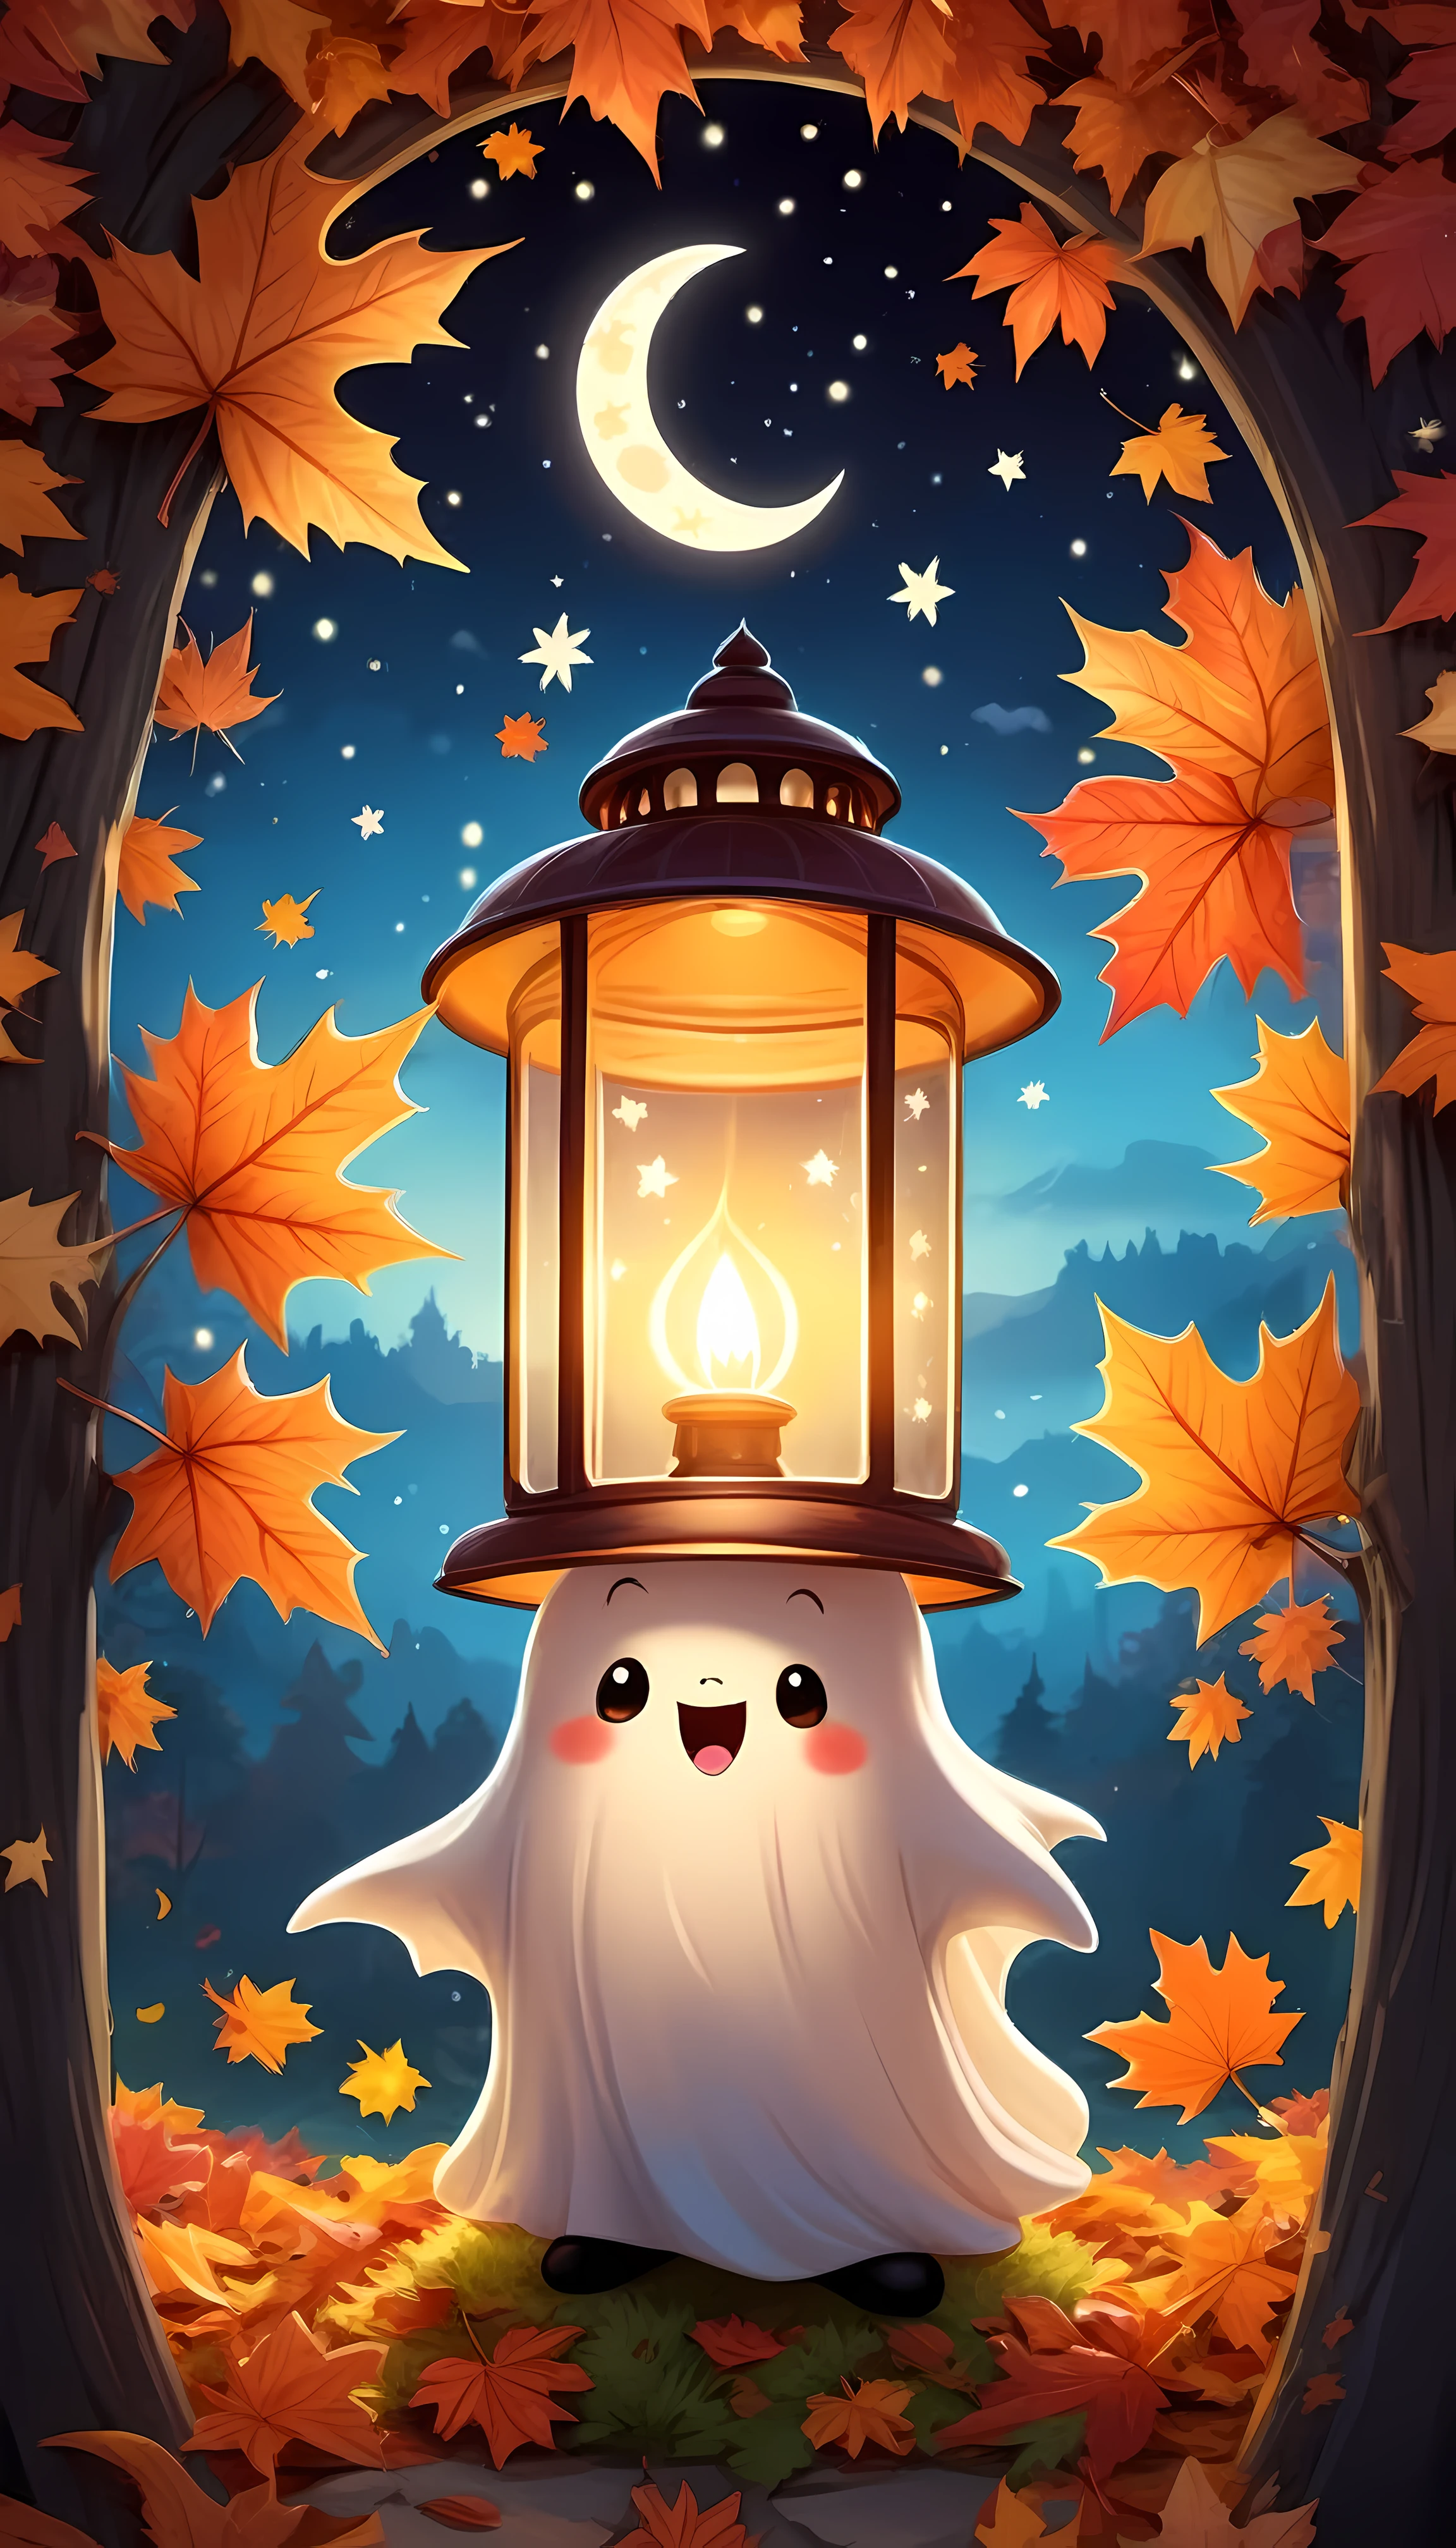 CuteCartoonAF, Cute Cartoon, masterpiece in maximum 16K resolution, superb quality, (a big sticker) on the modern fridge, designed as a cheerful ghost character holding a glowing lantern, floating amidst (colorful) autumn leaves, a friendly smile and playful expression, with the lantern emitting a warm inviting light, surrounded with twinkling stars and a crescent moon in the night magical sky, intricate gothic symbolore_Detail))
